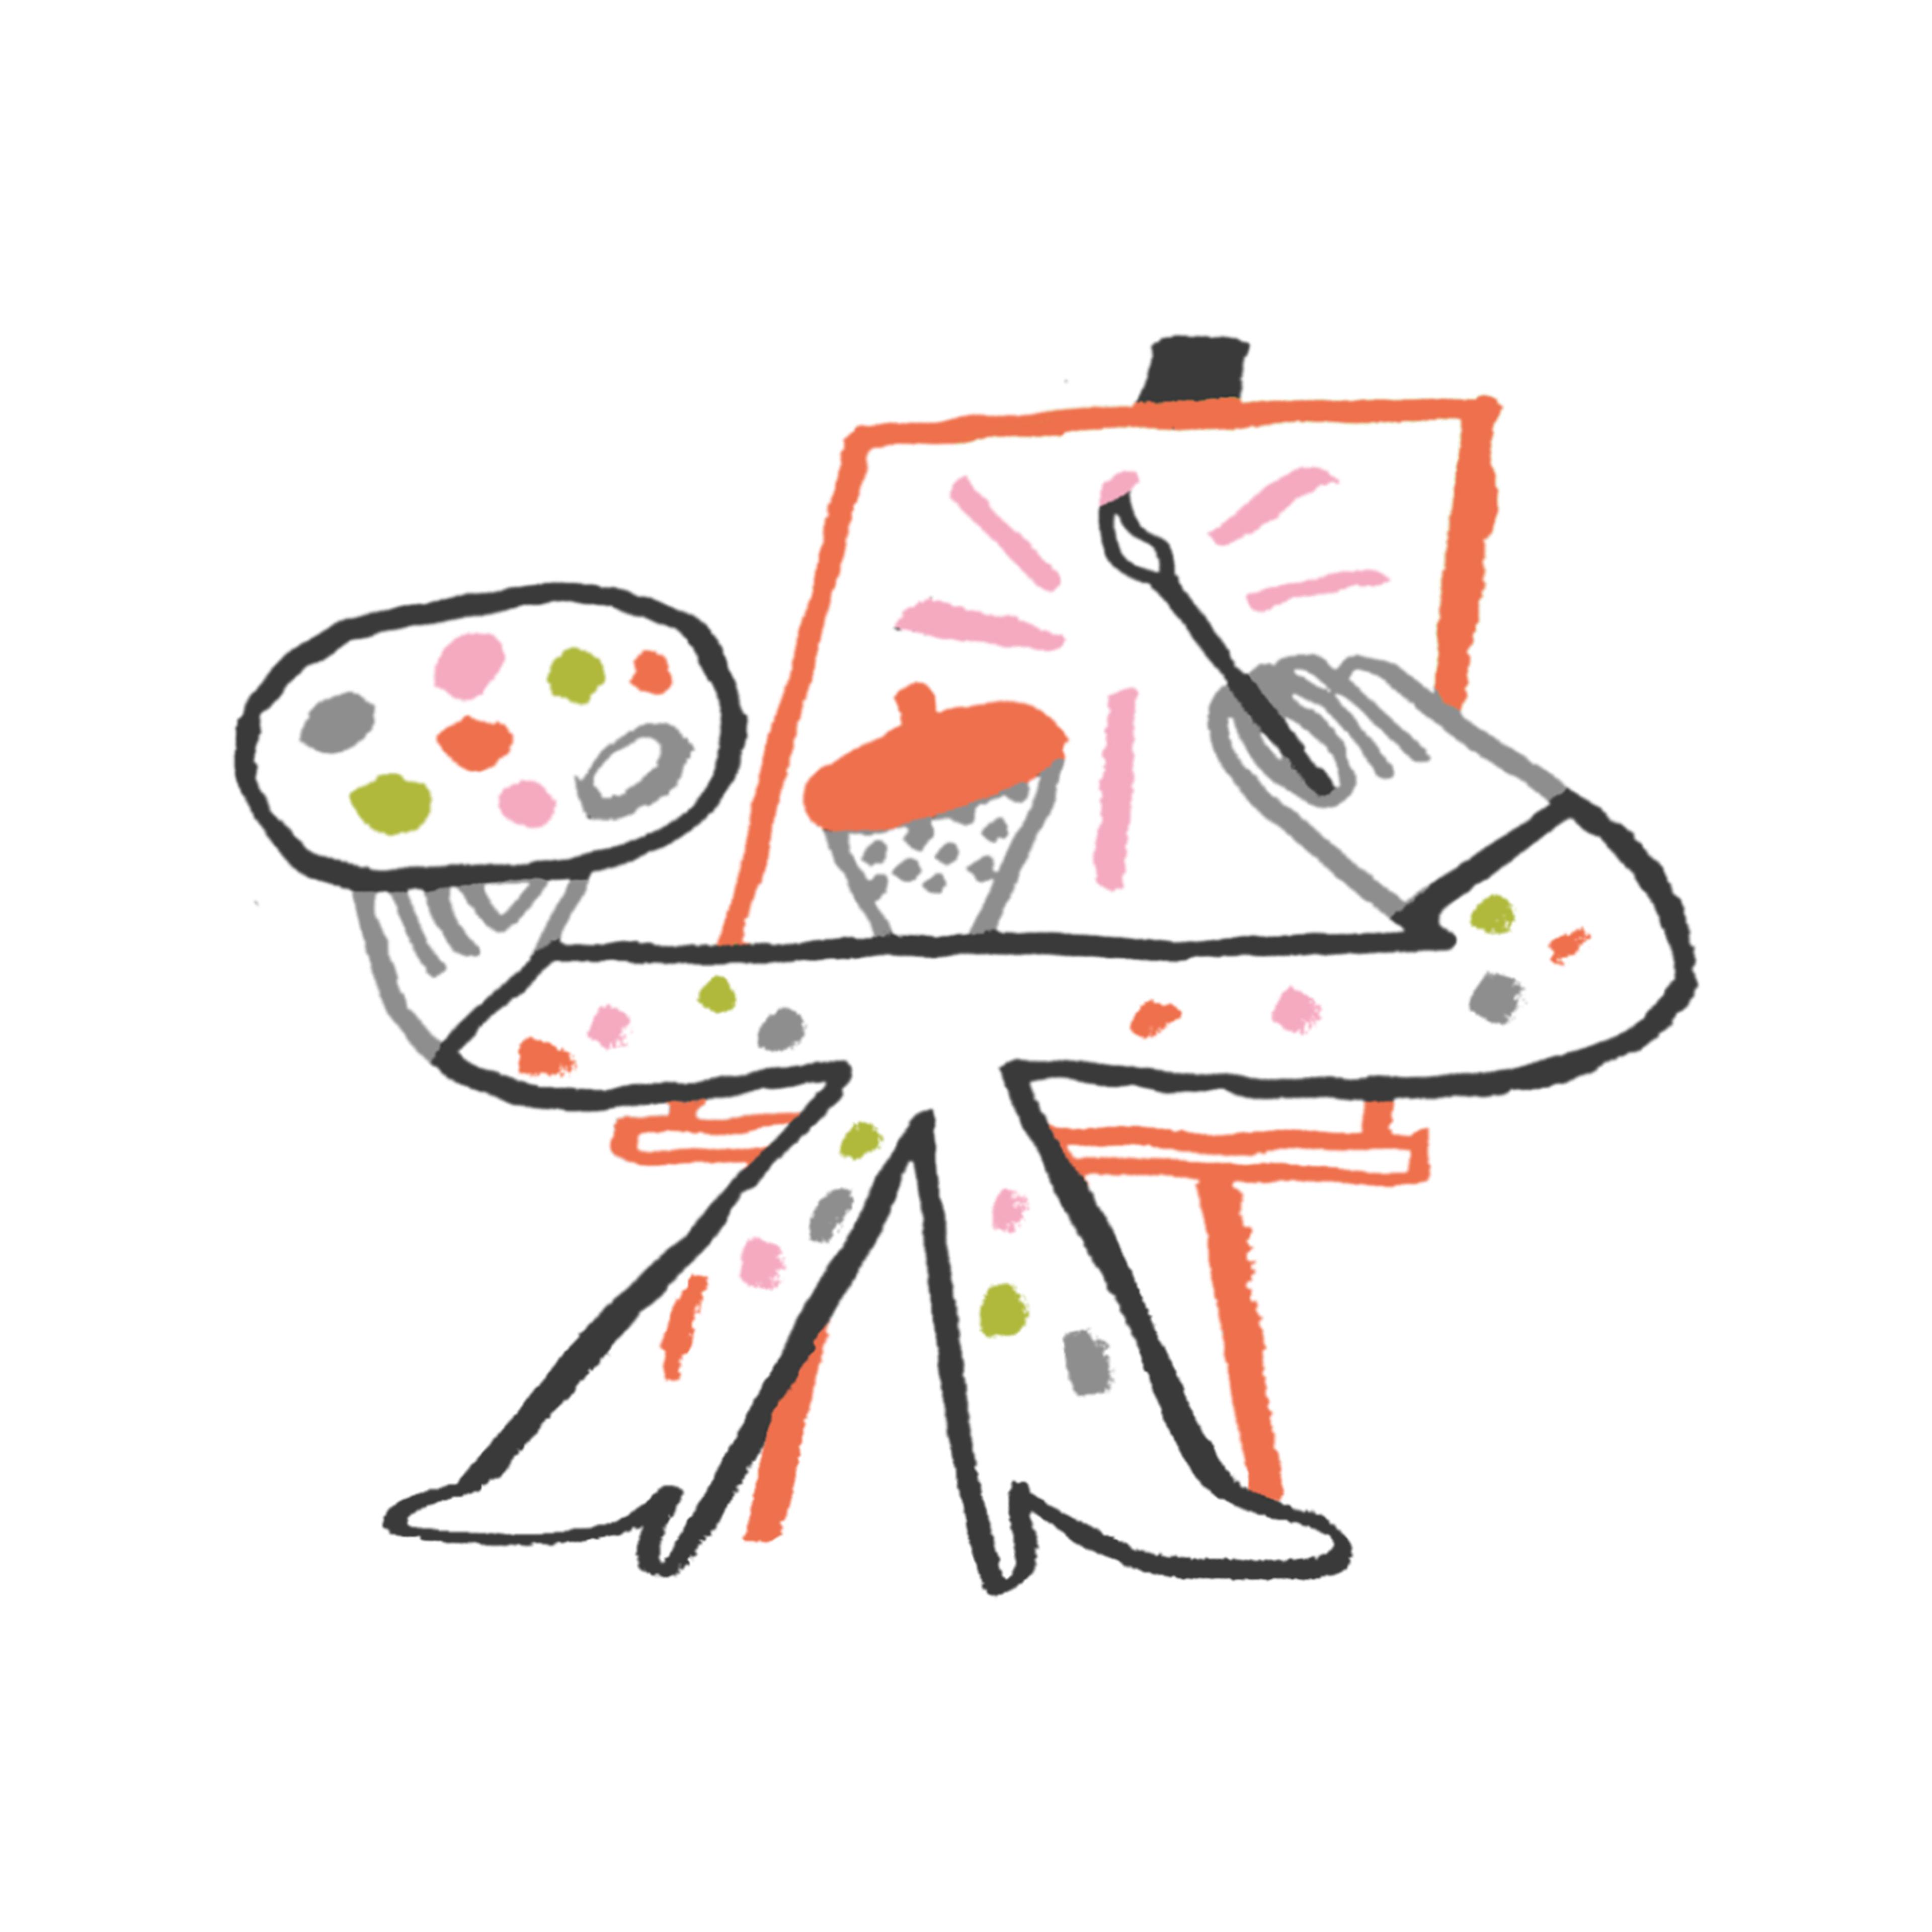 Illustration of an illustrator painting at an easel